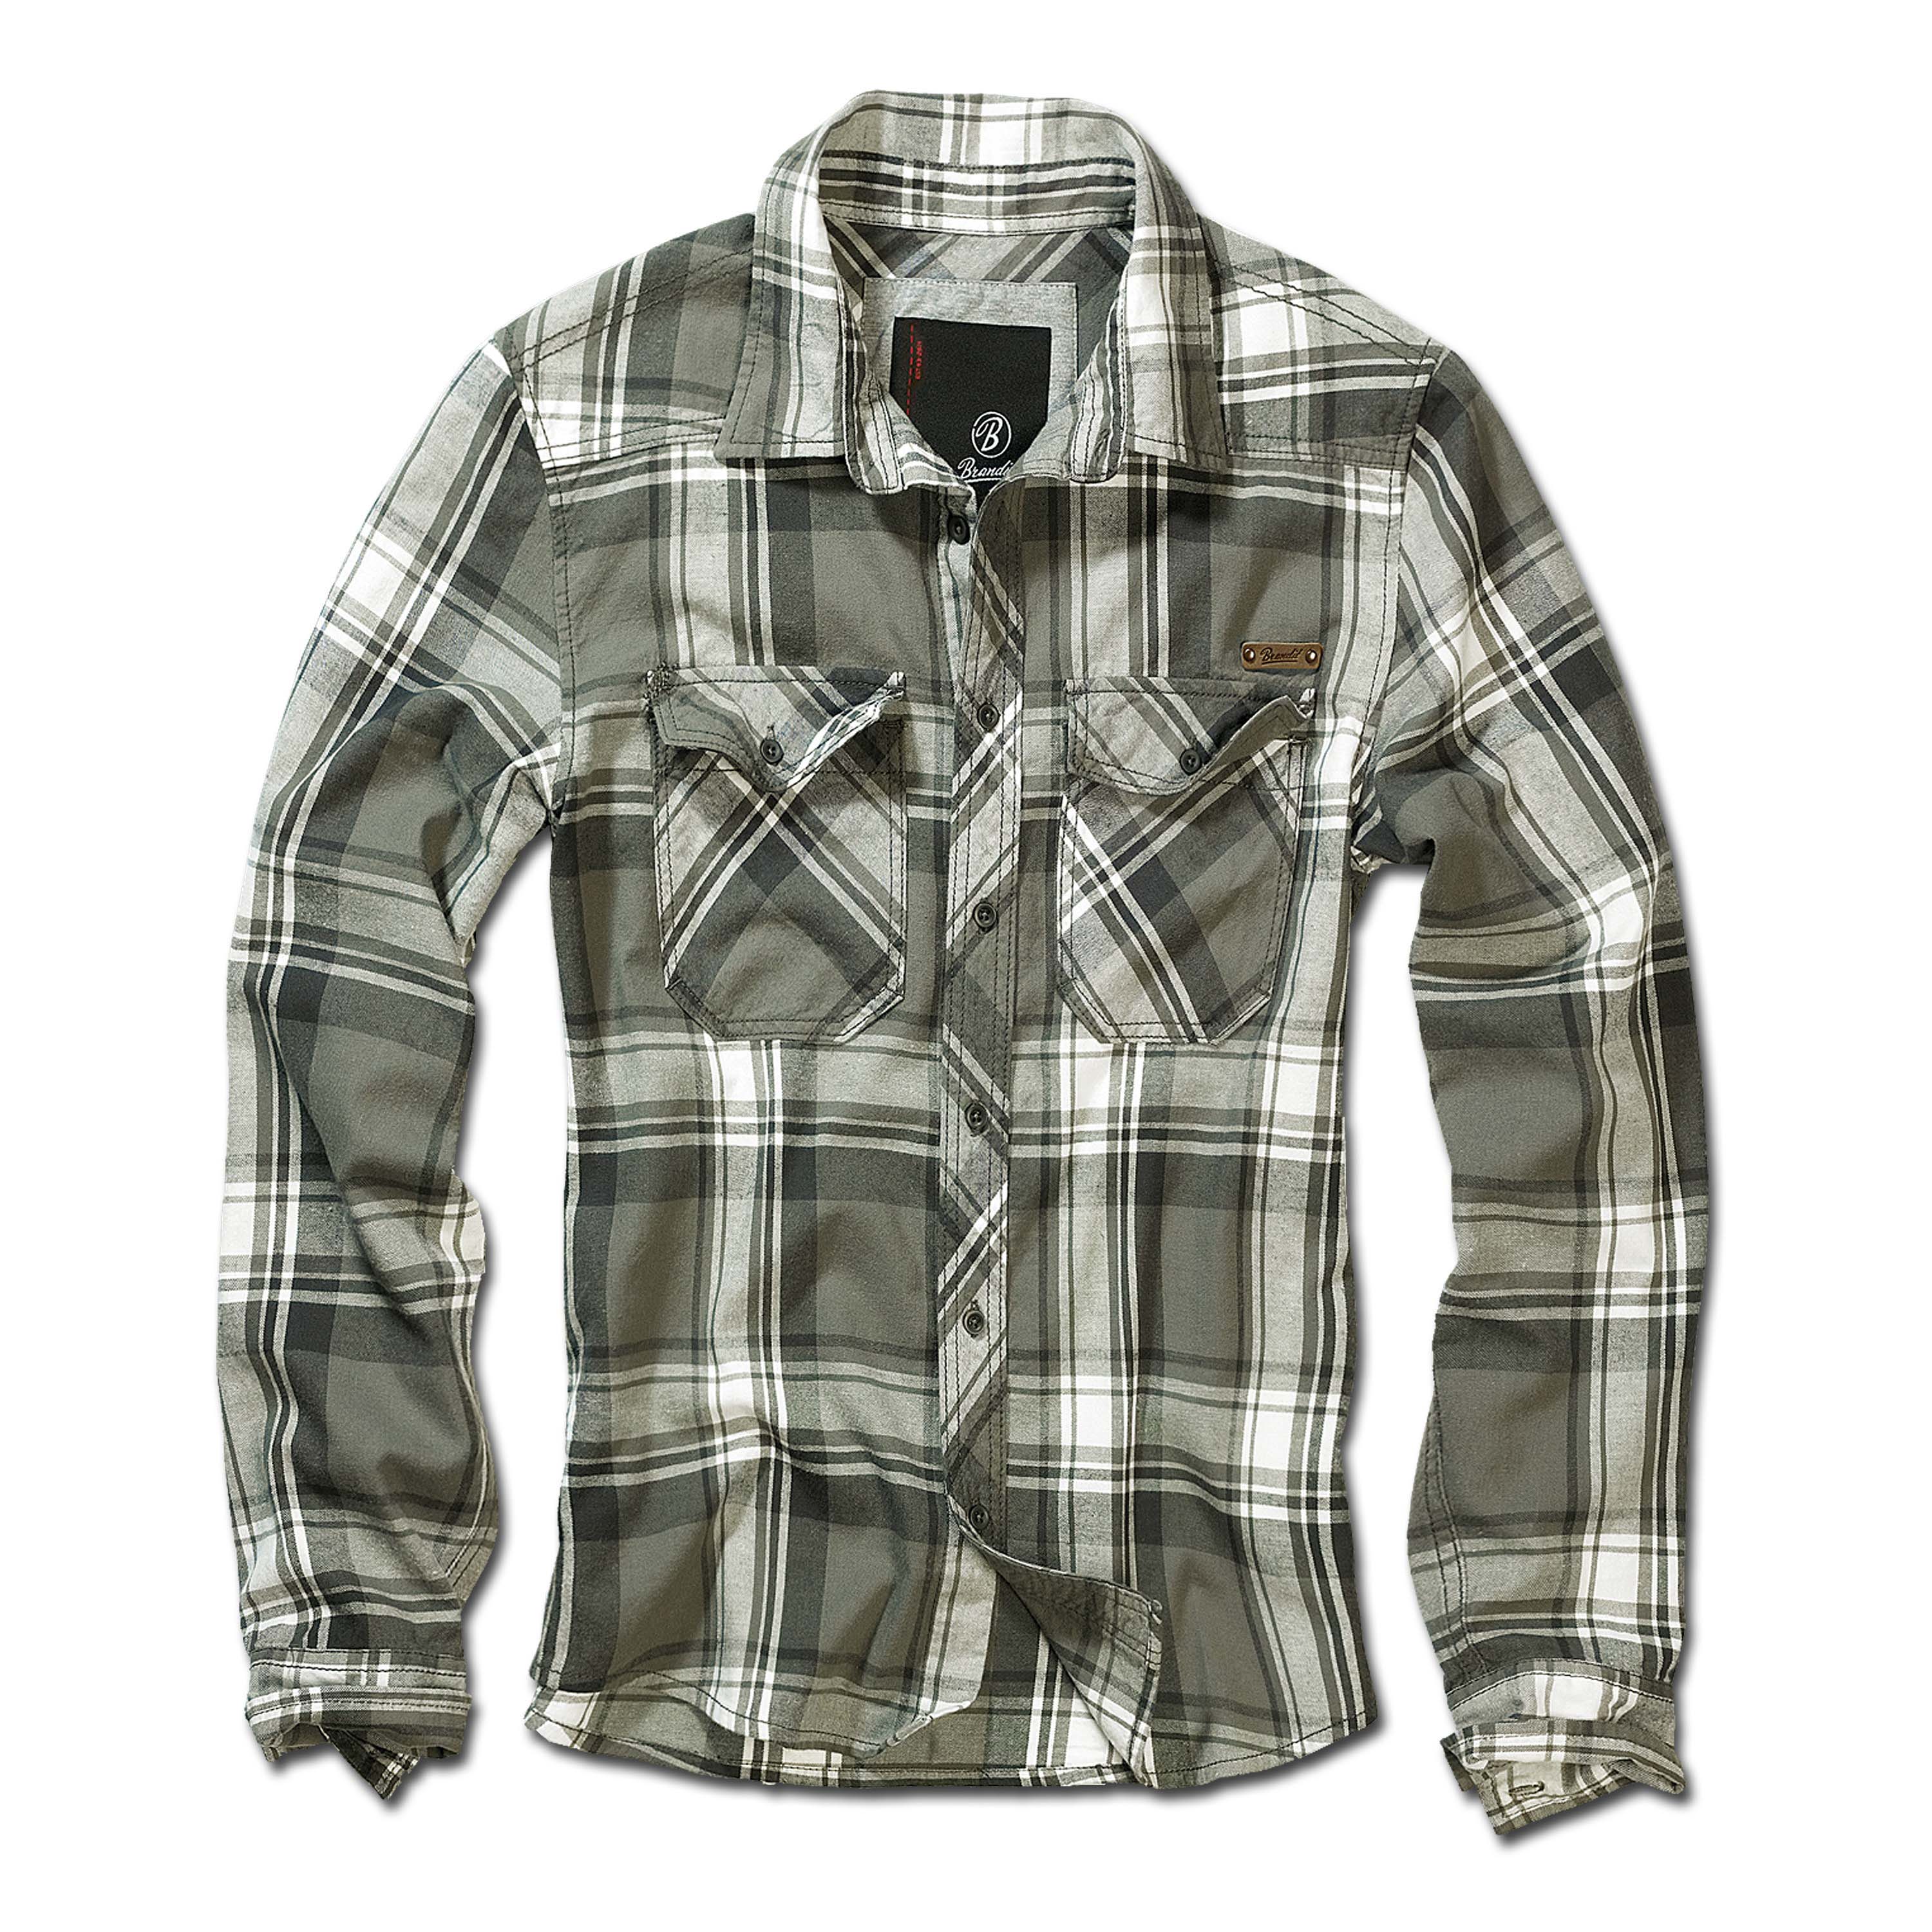 Purchase the Brandit Check Shirt olive by ASMC